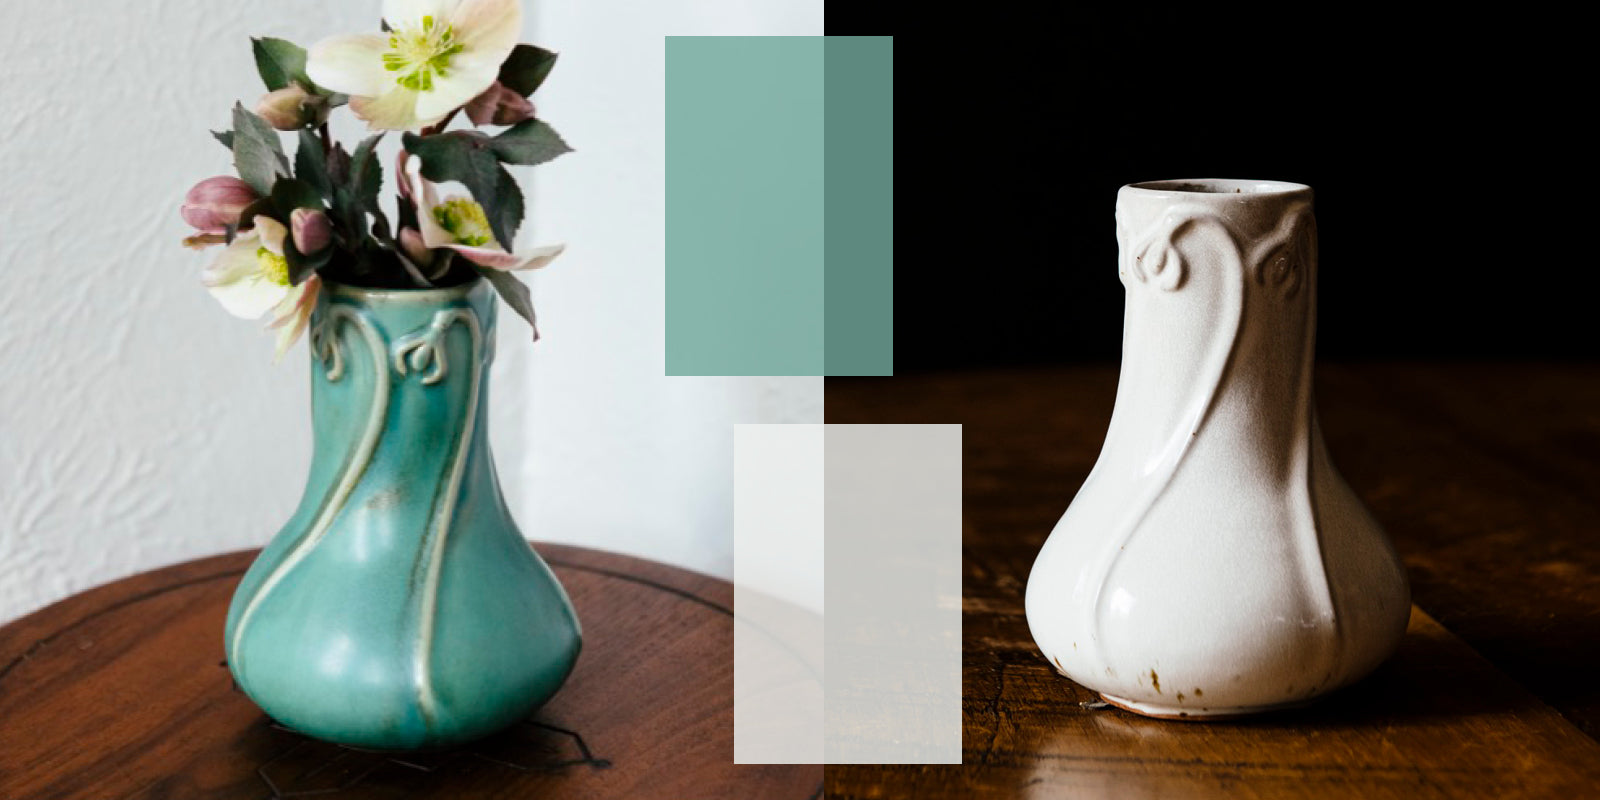 Snowdrop vases in Sorrel (left) and Birch (right) currently in production at Pewabic Pottery.